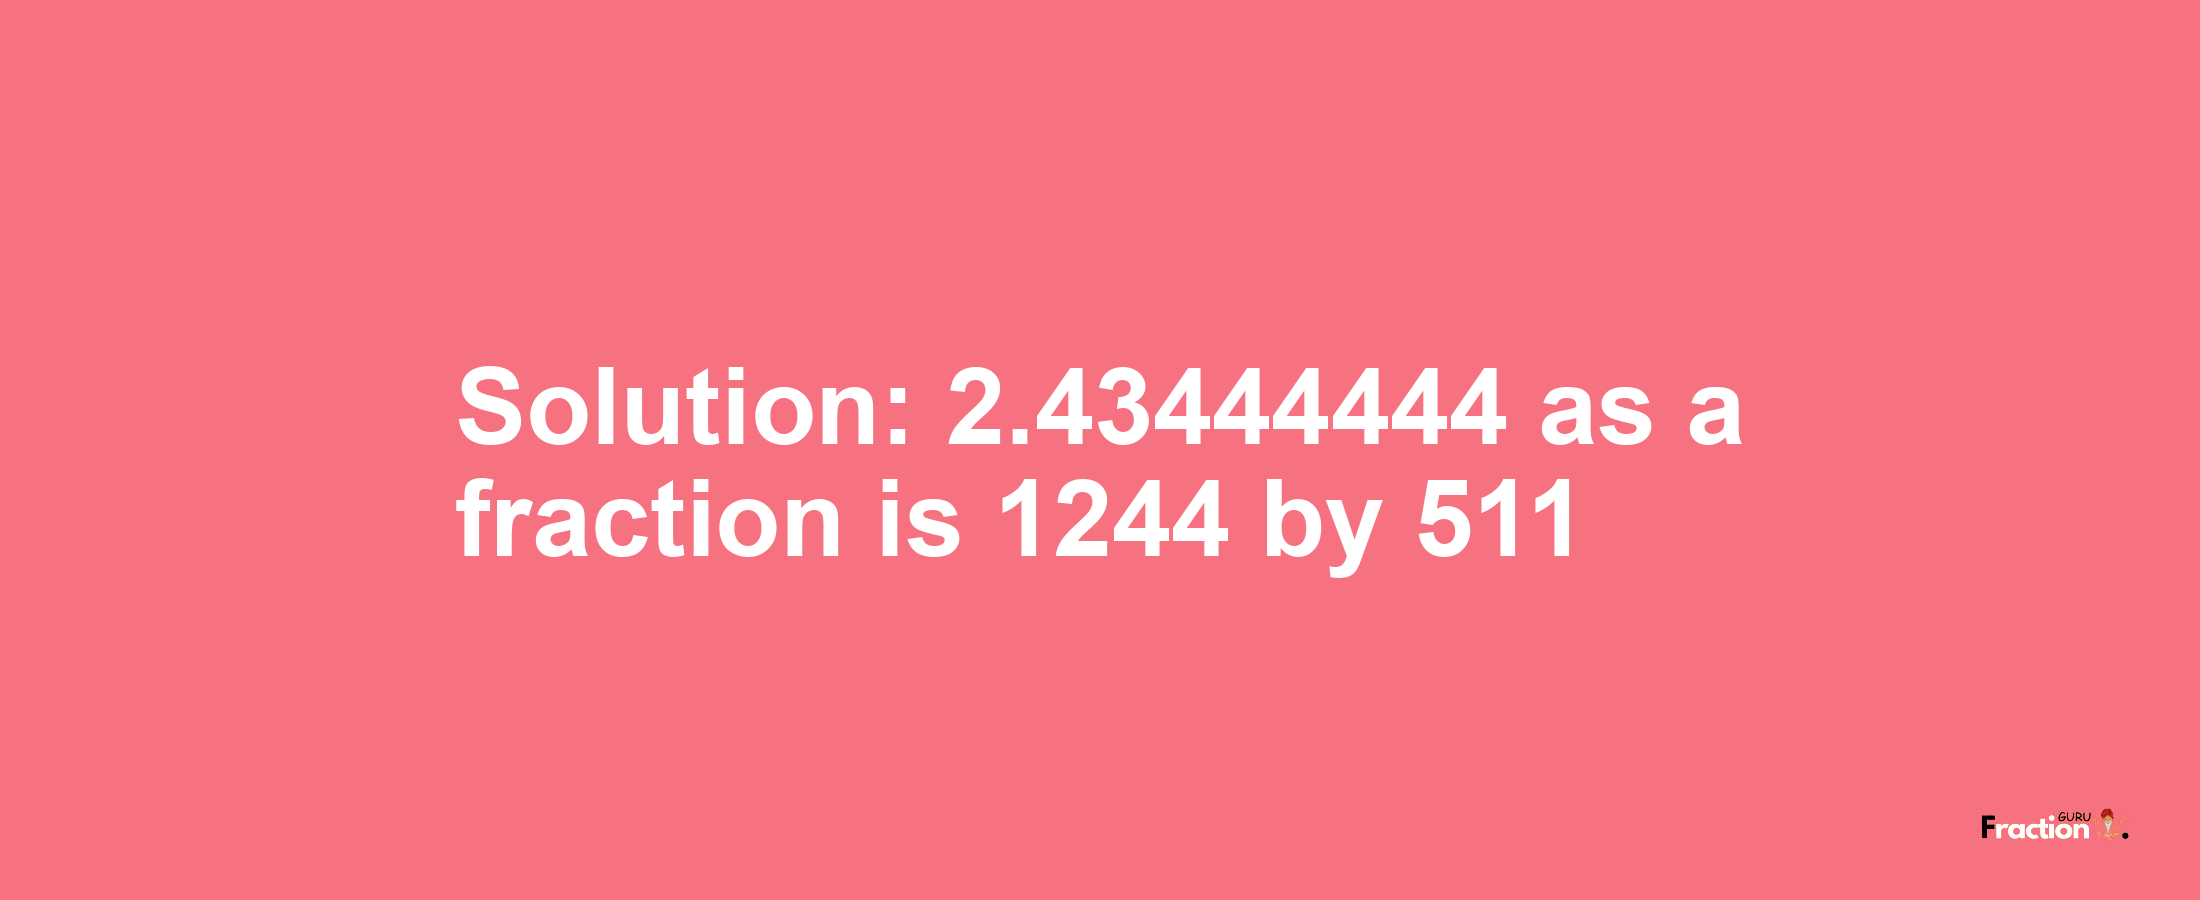 Solution:2.43444444 as a fraction is 1244/511